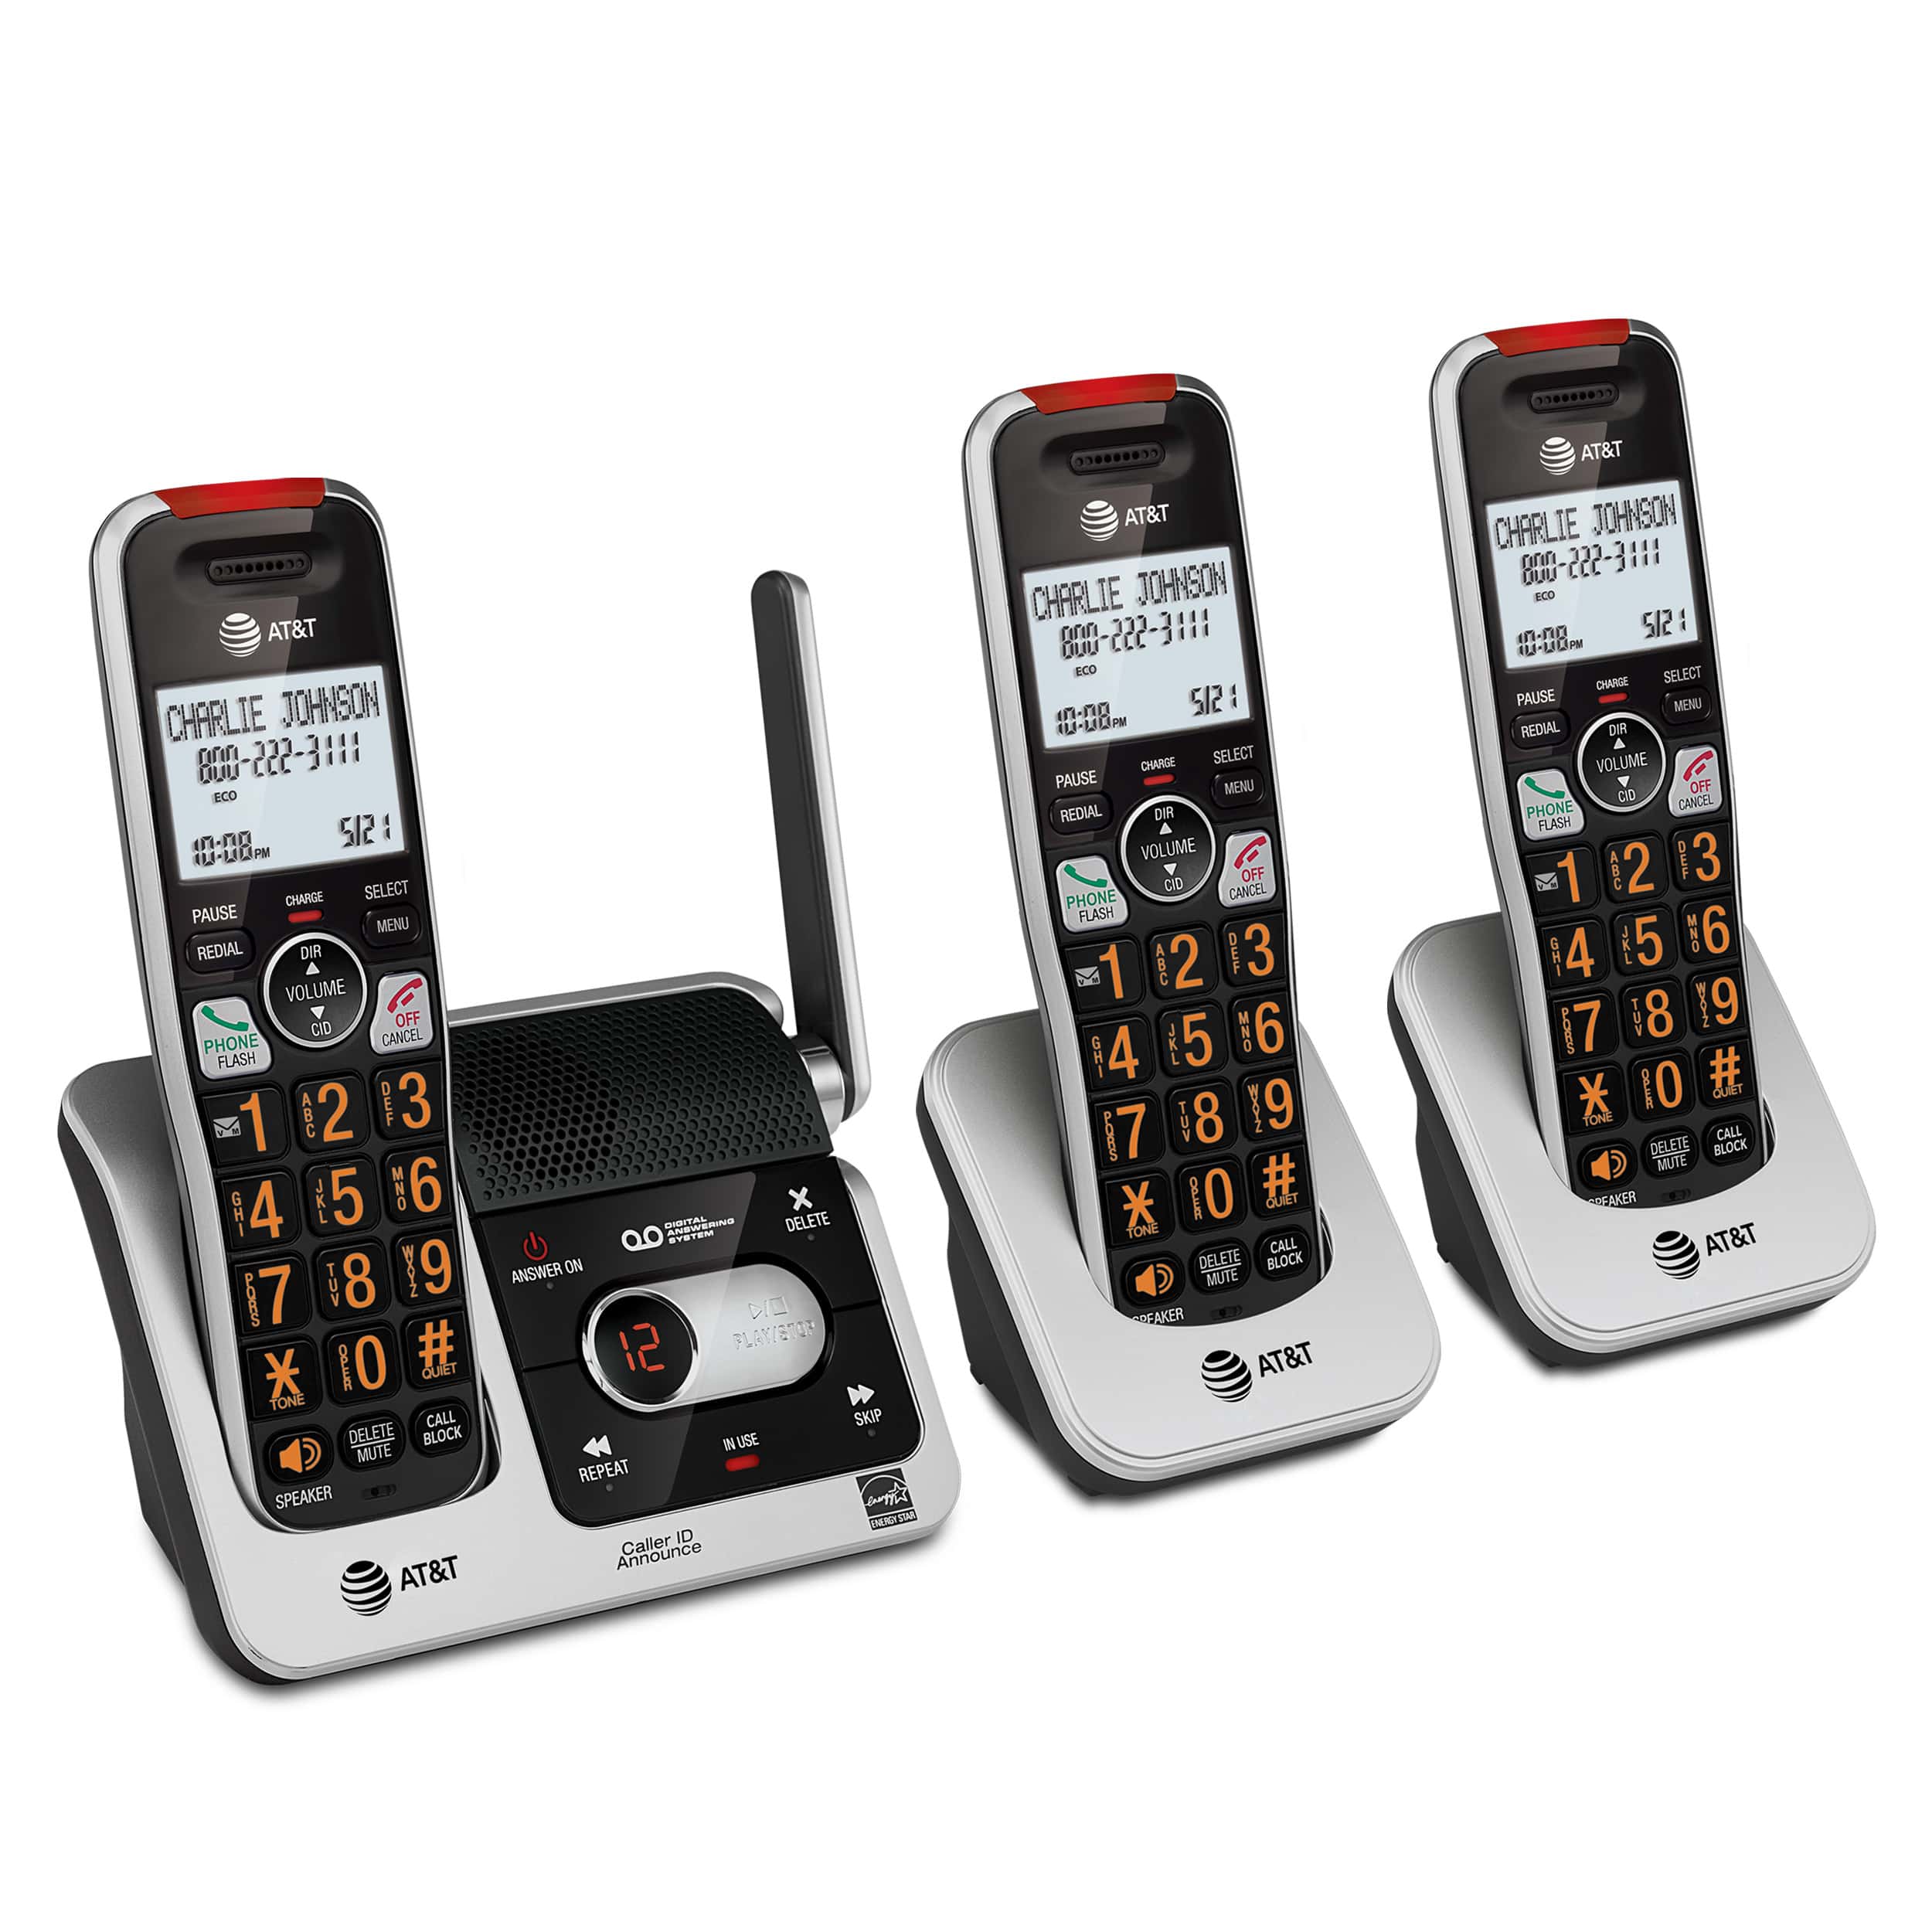 3-Handset Cordless Phone with Unsurpassed Range, Smart Call Blocker and Answering System - view 3